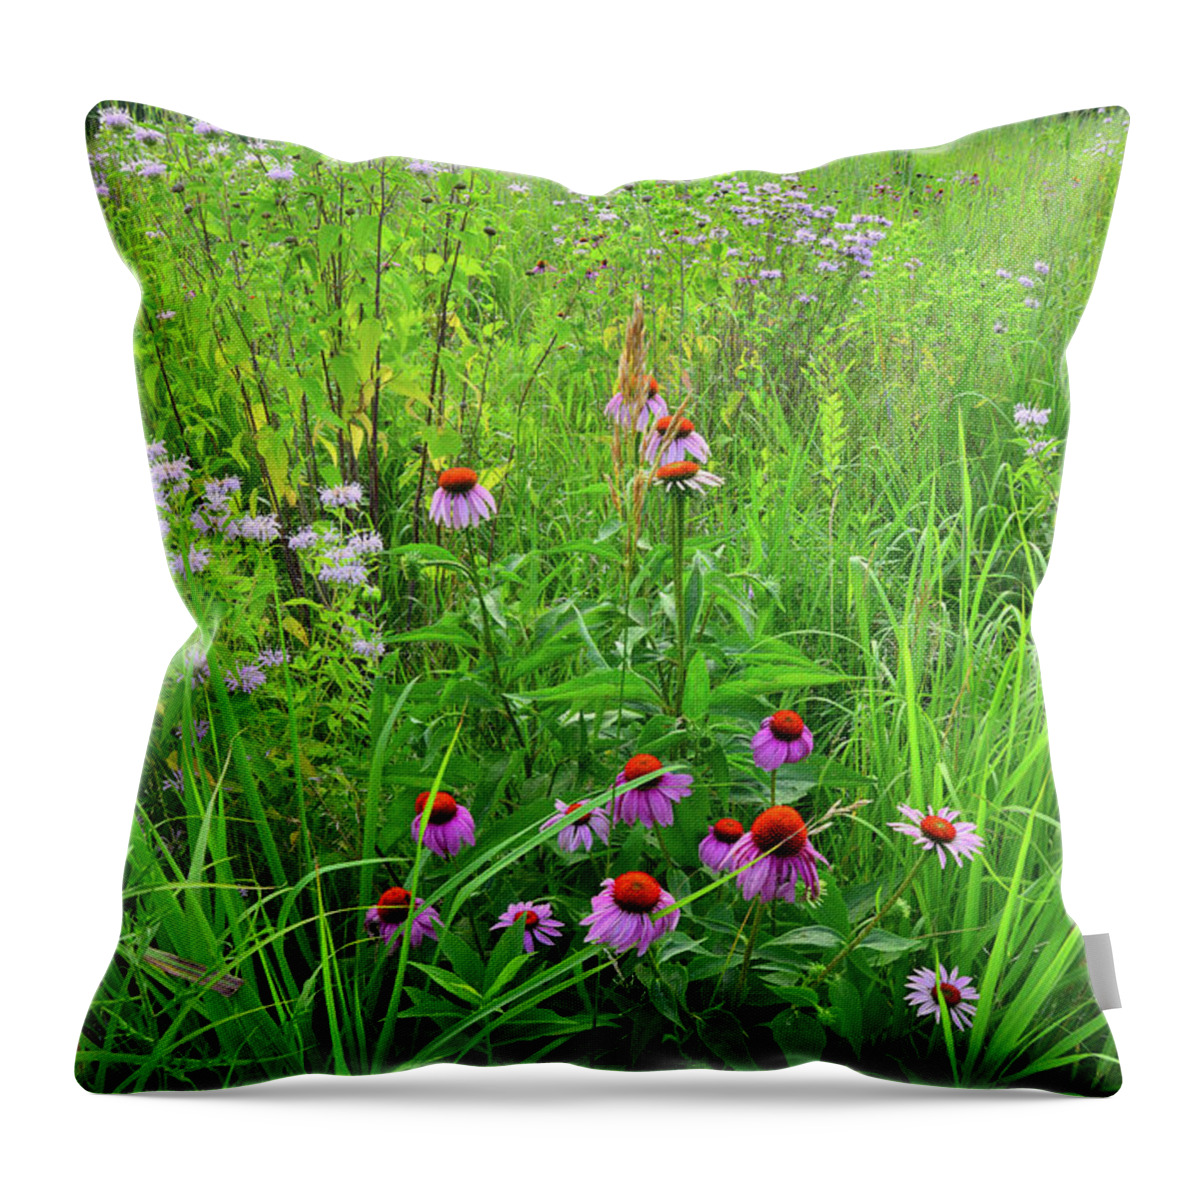 Moraine Hills State Park Throw Pillow featuring the photograph Moraine Hills Shelley Kelly Prairie Wildflowers by Ray Mathis